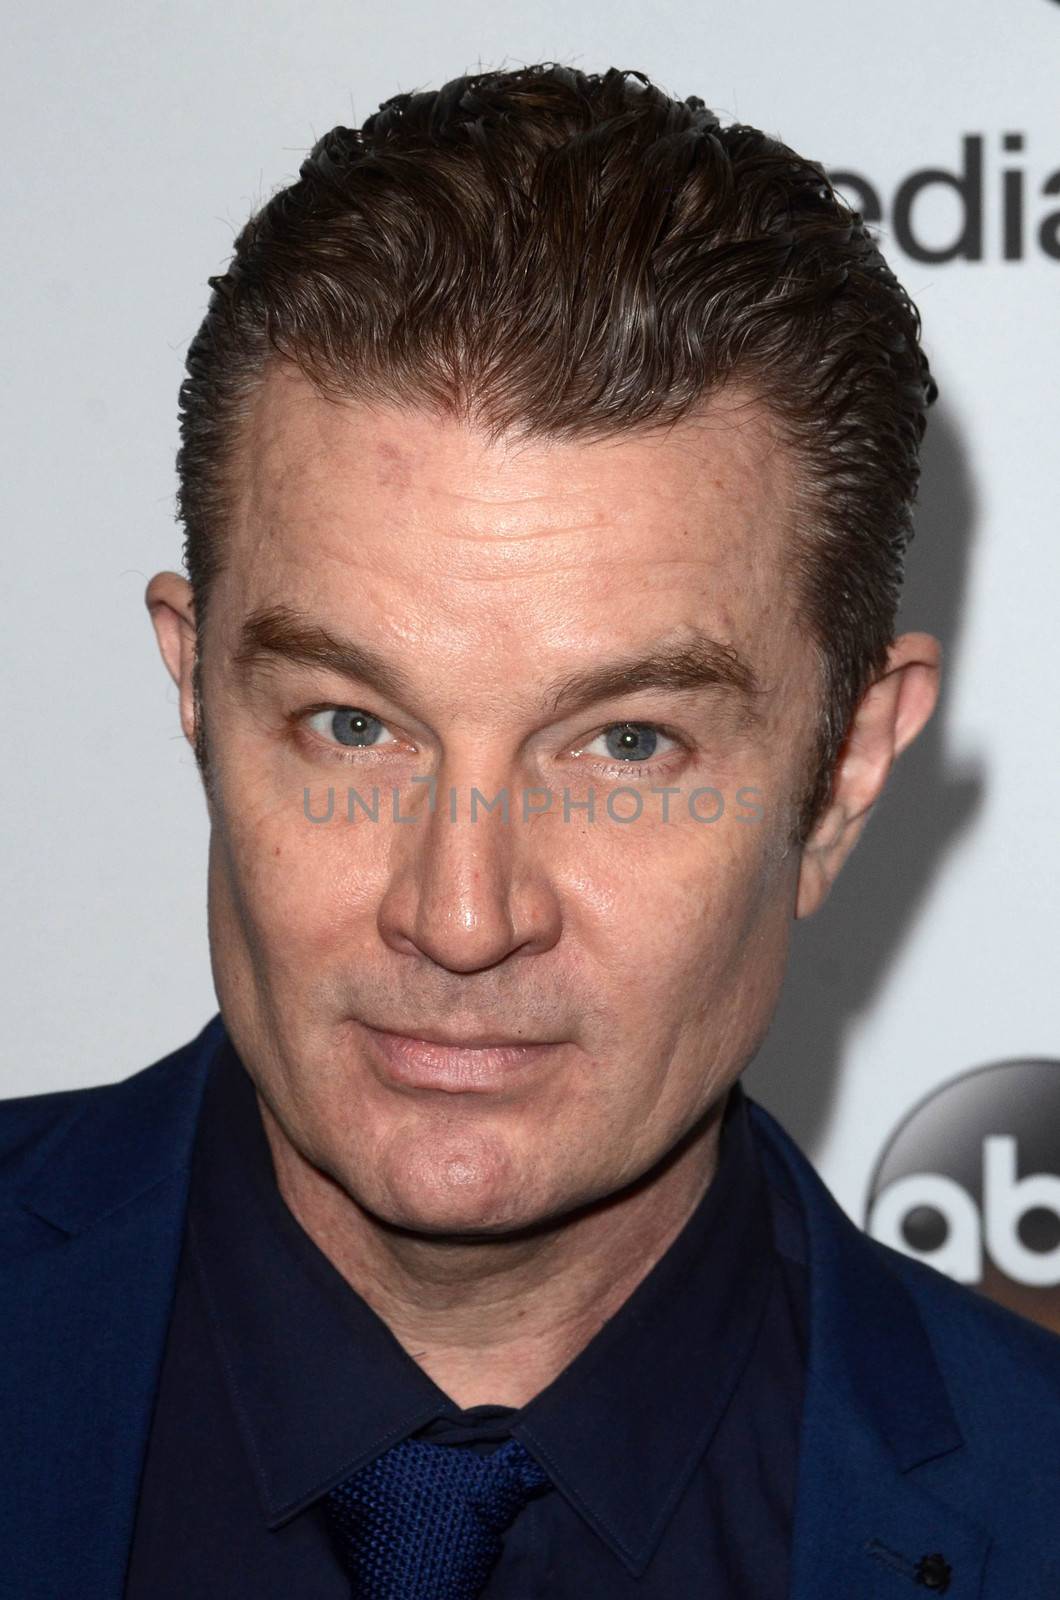 James Marsters
at the 2017 ABC International Upfronts, Disney Studios, Burbank, CA 05-21-17/ImageCollect by ImageCollect